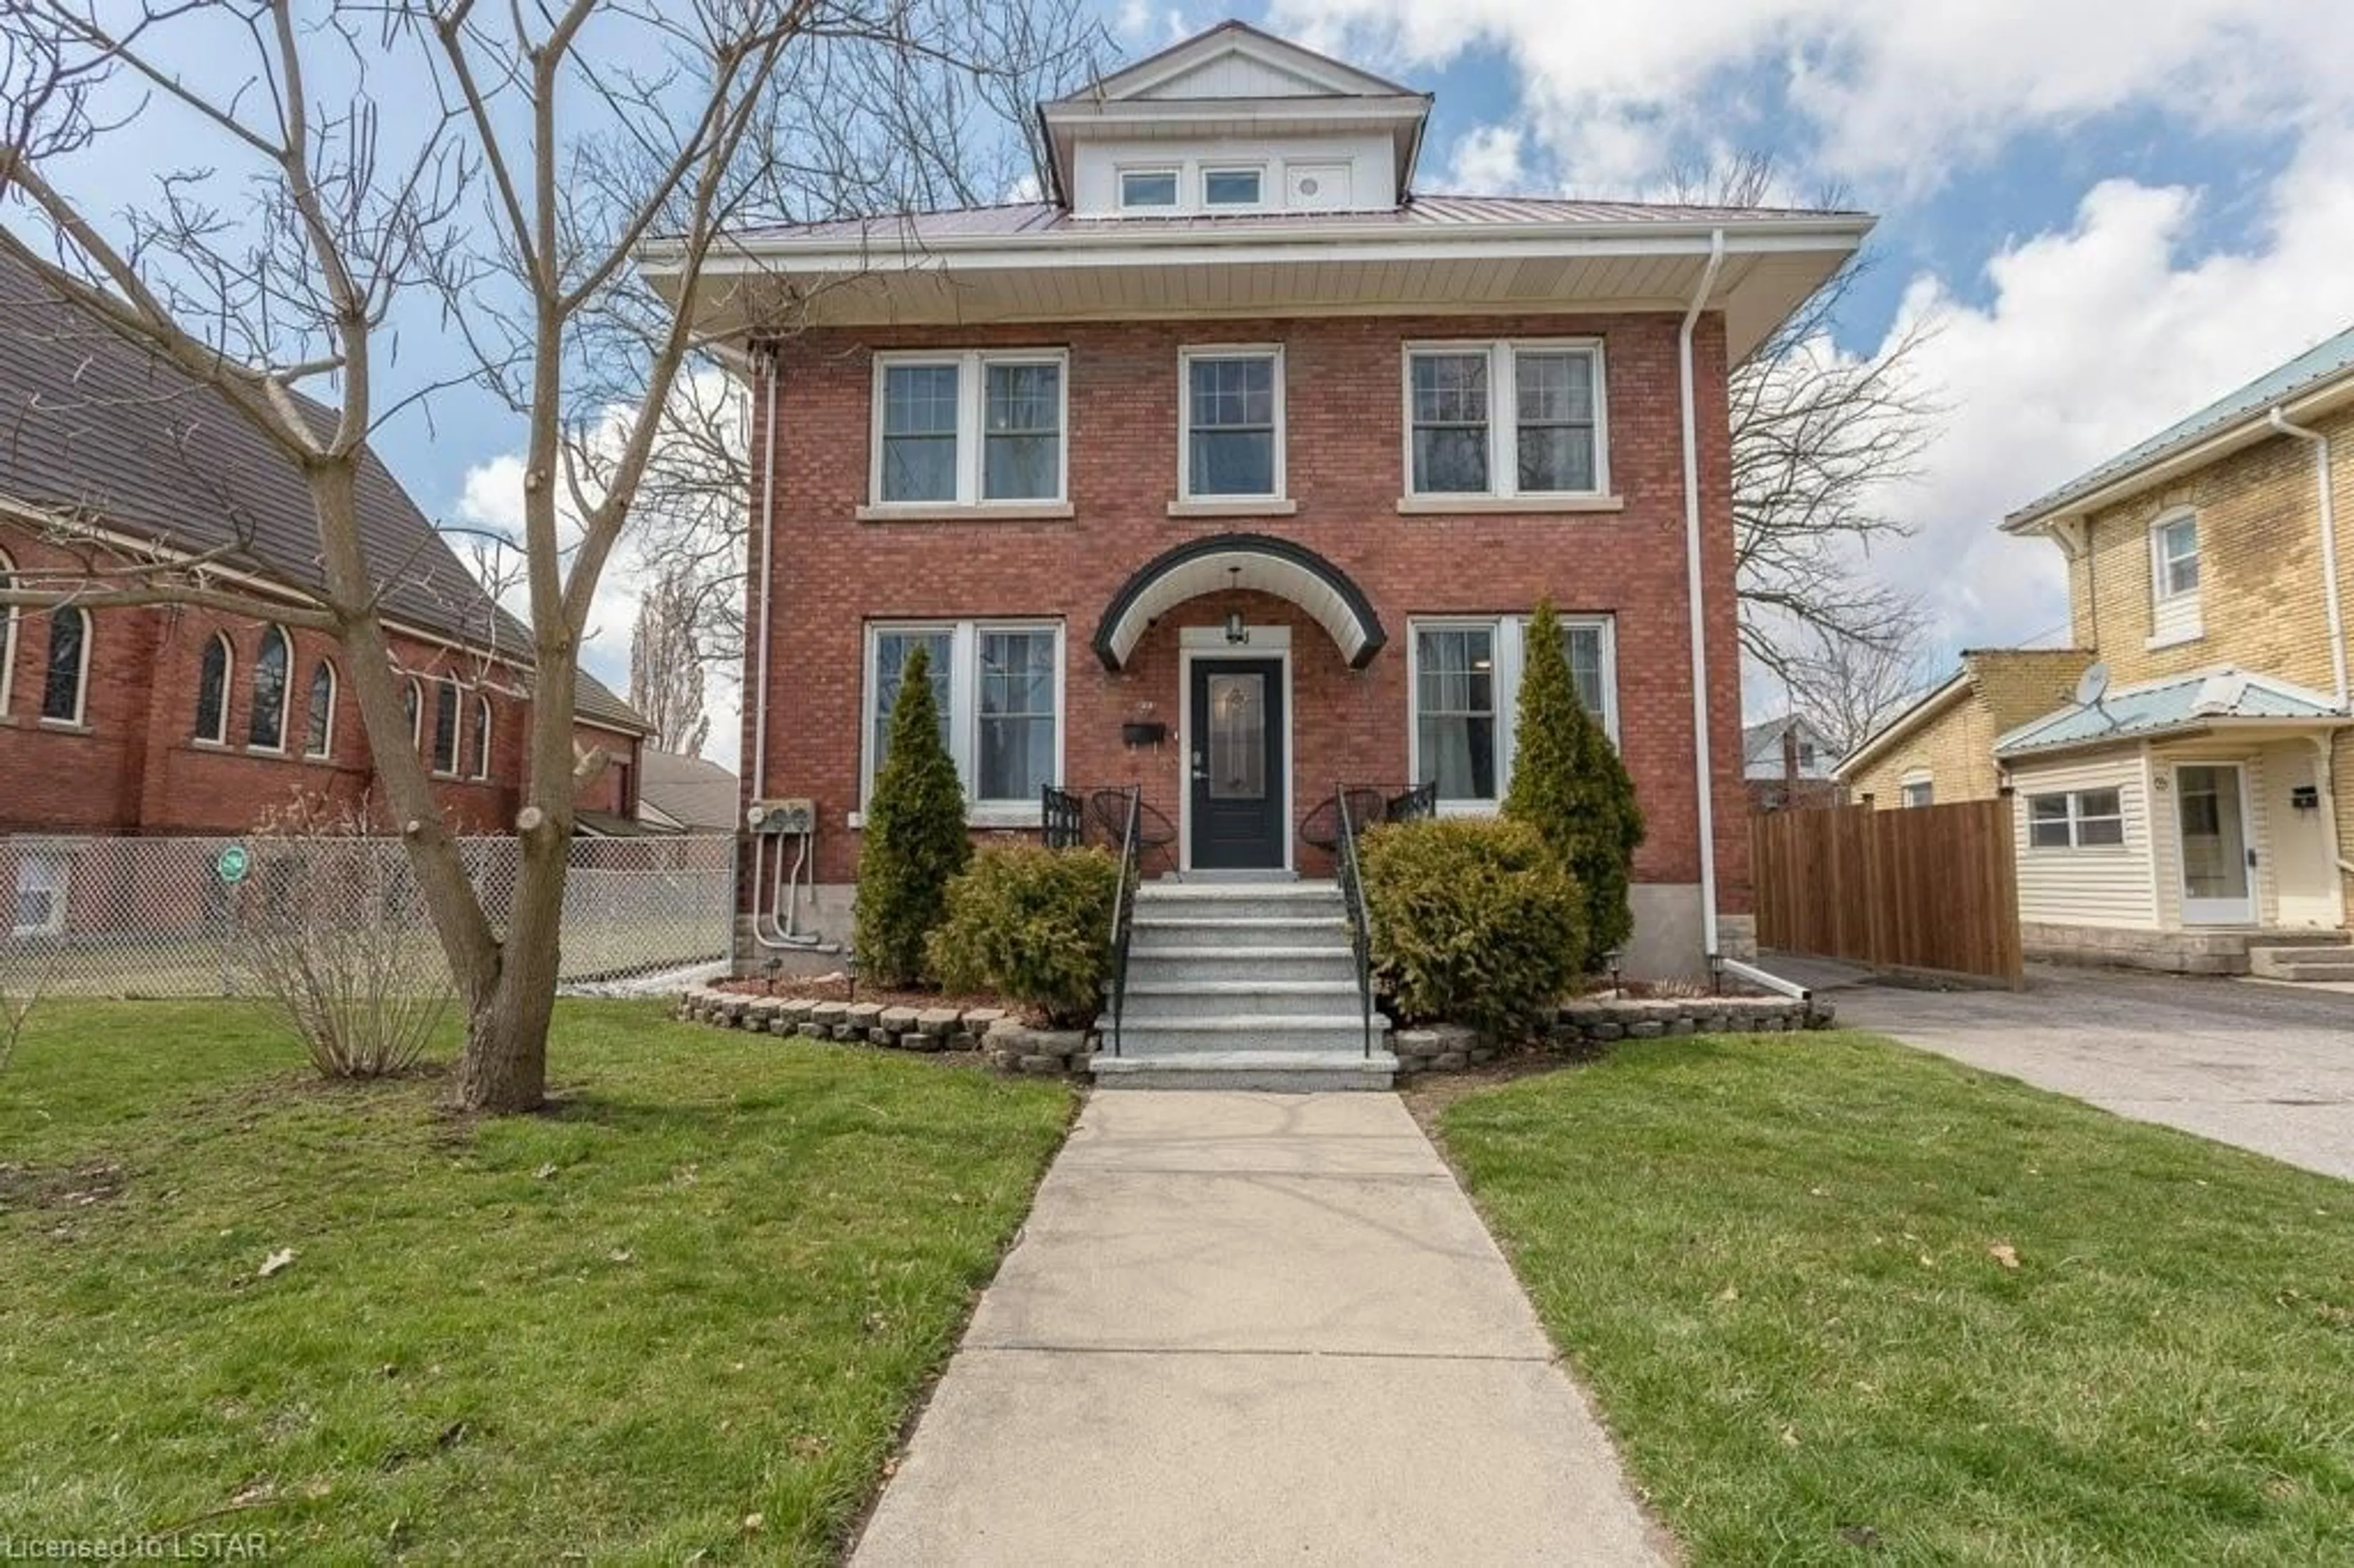 Home with brick exterior material for 24 Flora St, St. Thomas Ontario N5P 2X4